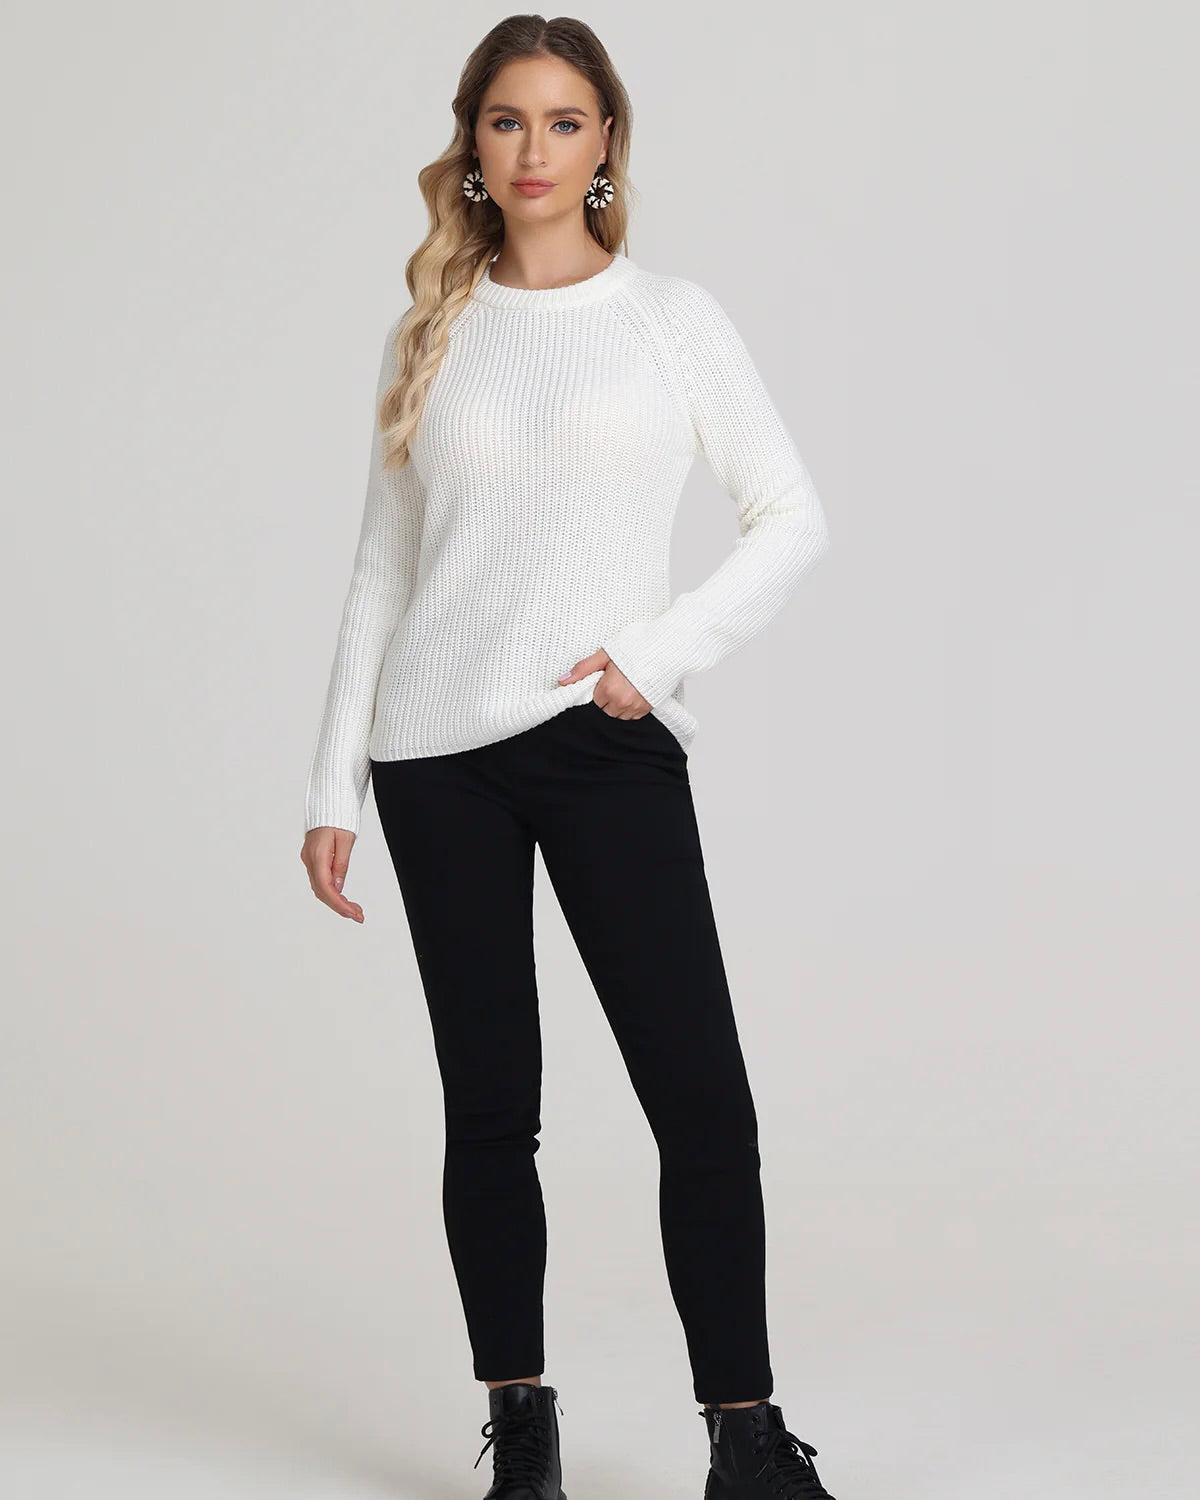 Model wearing 525 America Jane Pullover Sweater in white wearing black jeans on a white background